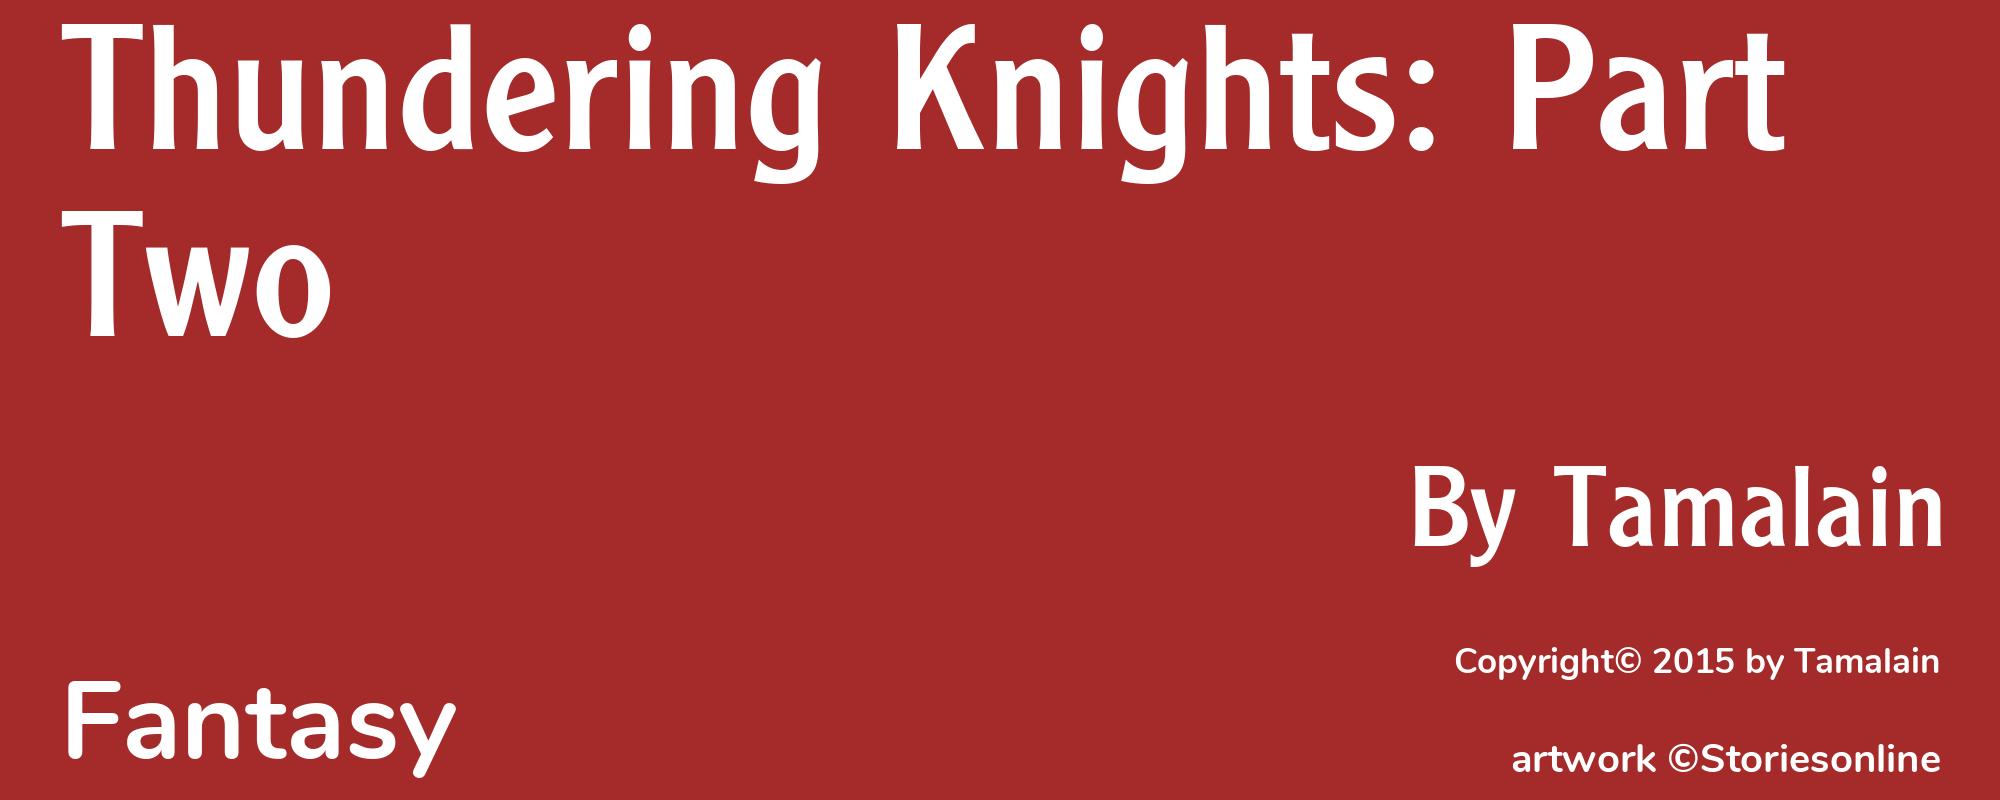 Thundering Knights: Part Two - Cover